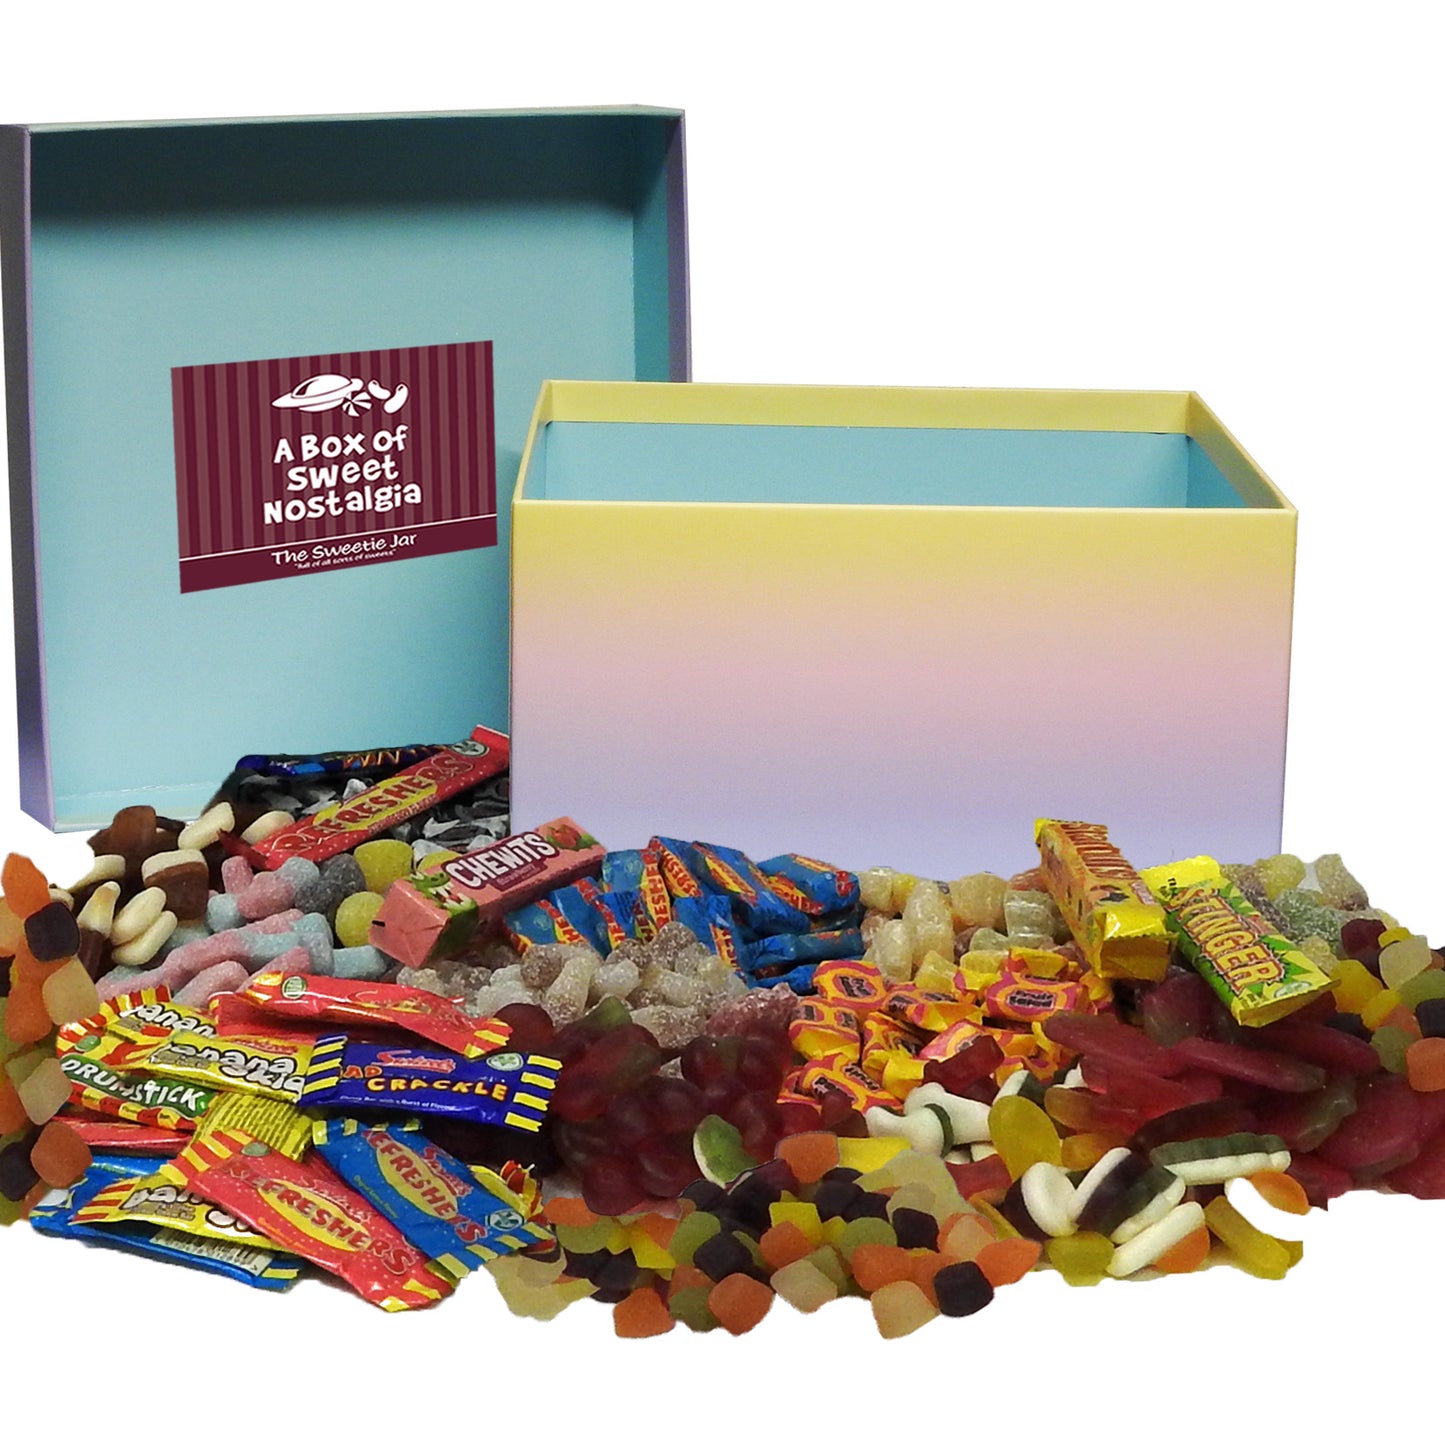 Chews & Jelly Sweets Gift Box : Large - Retro Sweets Gift Boxes at The Sweetie Jar